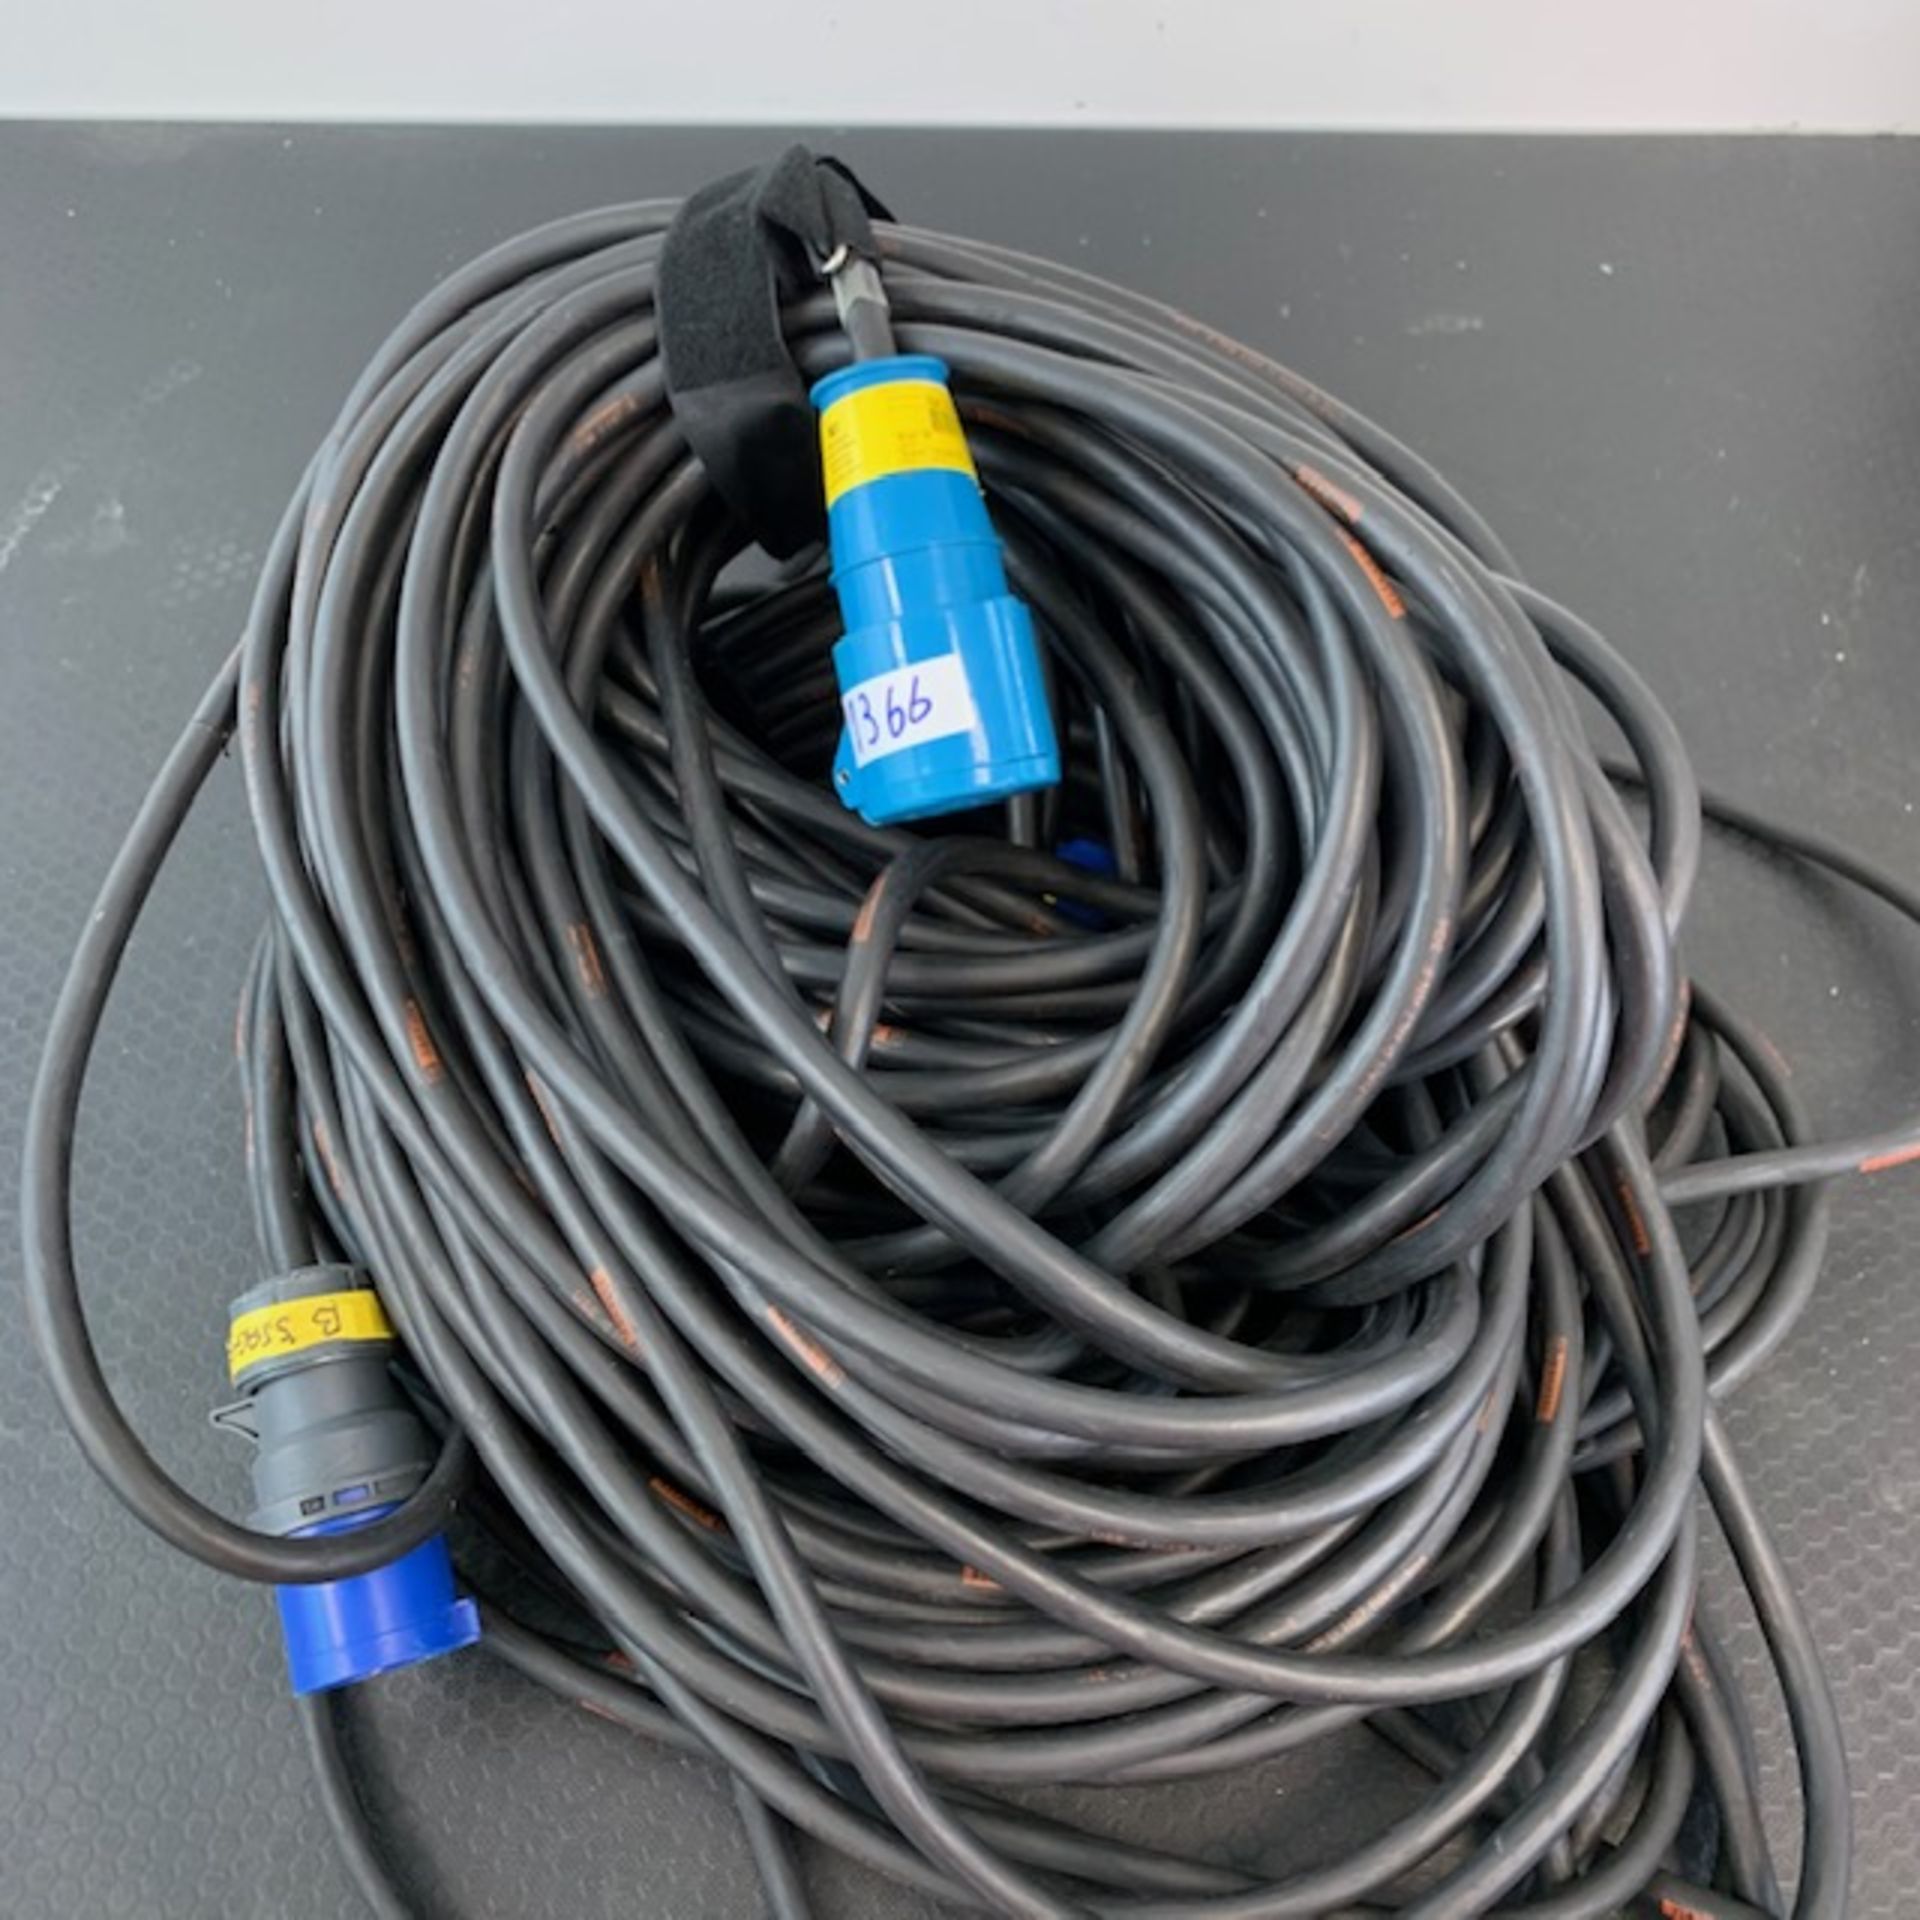 2 X 32Amp Single Phase 30M Cable - Ref: 1366 - CL581 - Location: Altrincham WA14Items will be